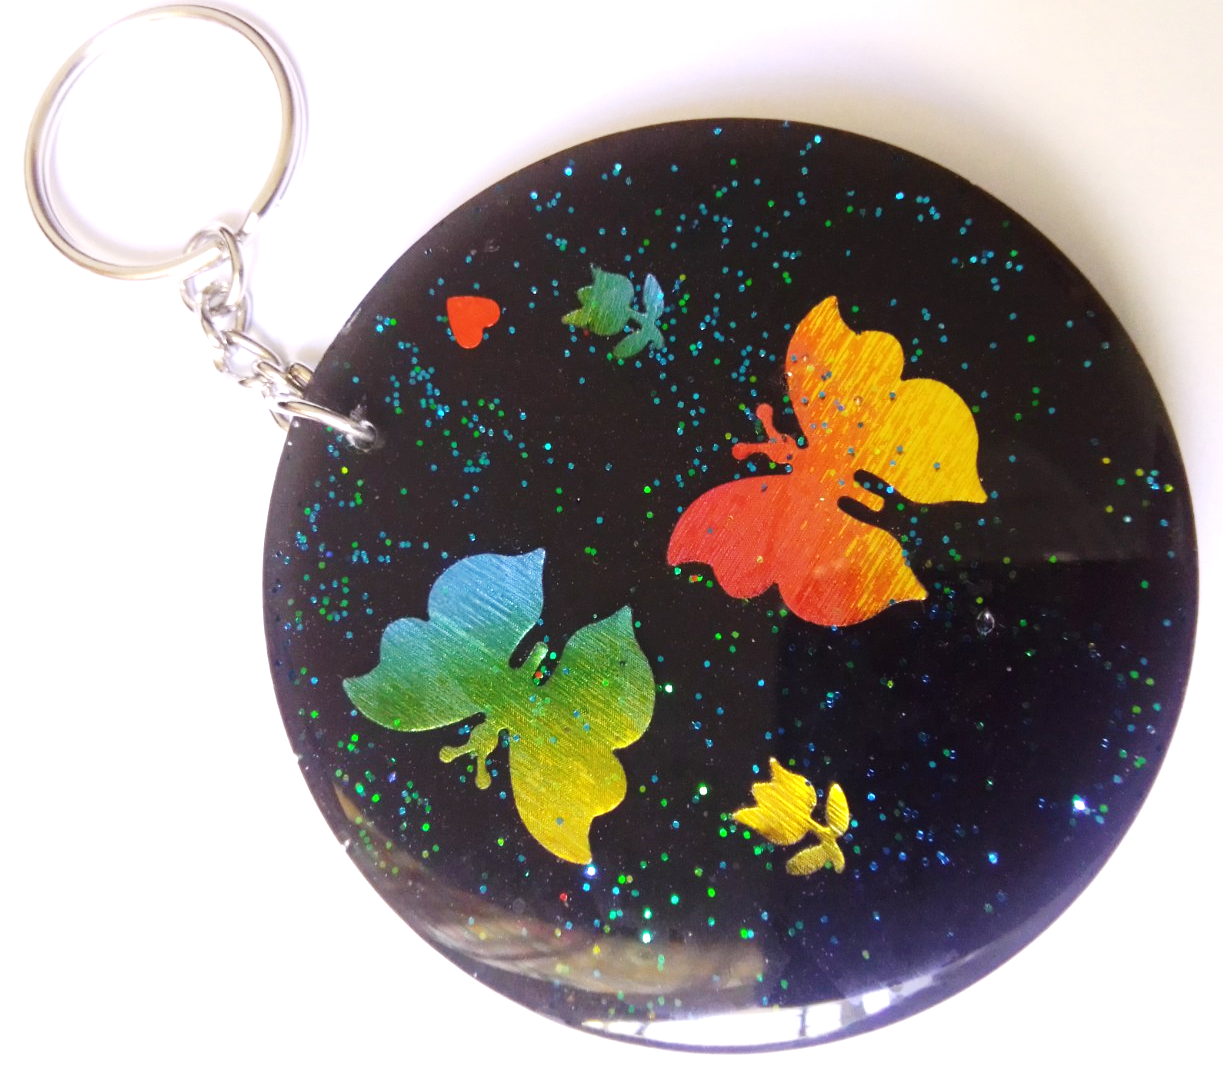 volcanic ash keyring/bag ornament decorated with butterflies and flowers